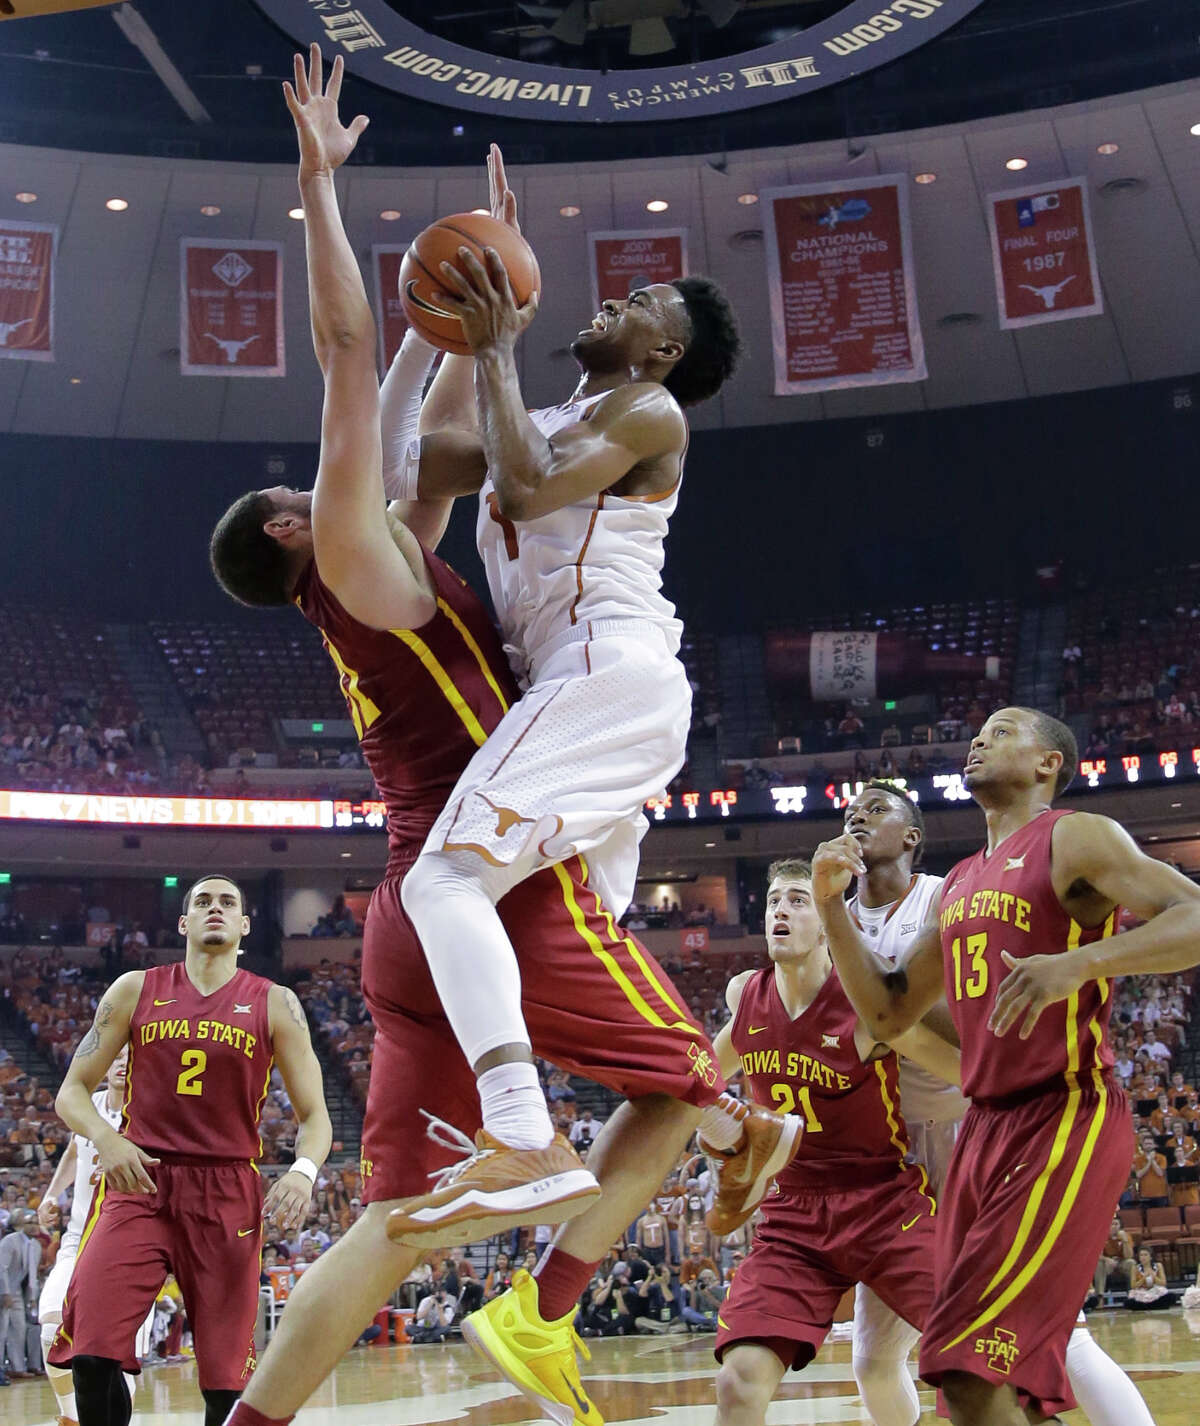 Texas' Isaiah Taylor, right, goes through Iowa State's Georges Niang on his way to a basket in the second half Saturday in Austin. Taylor scored 23 points in the Longhorns' loss, their sixth in the last nine games.